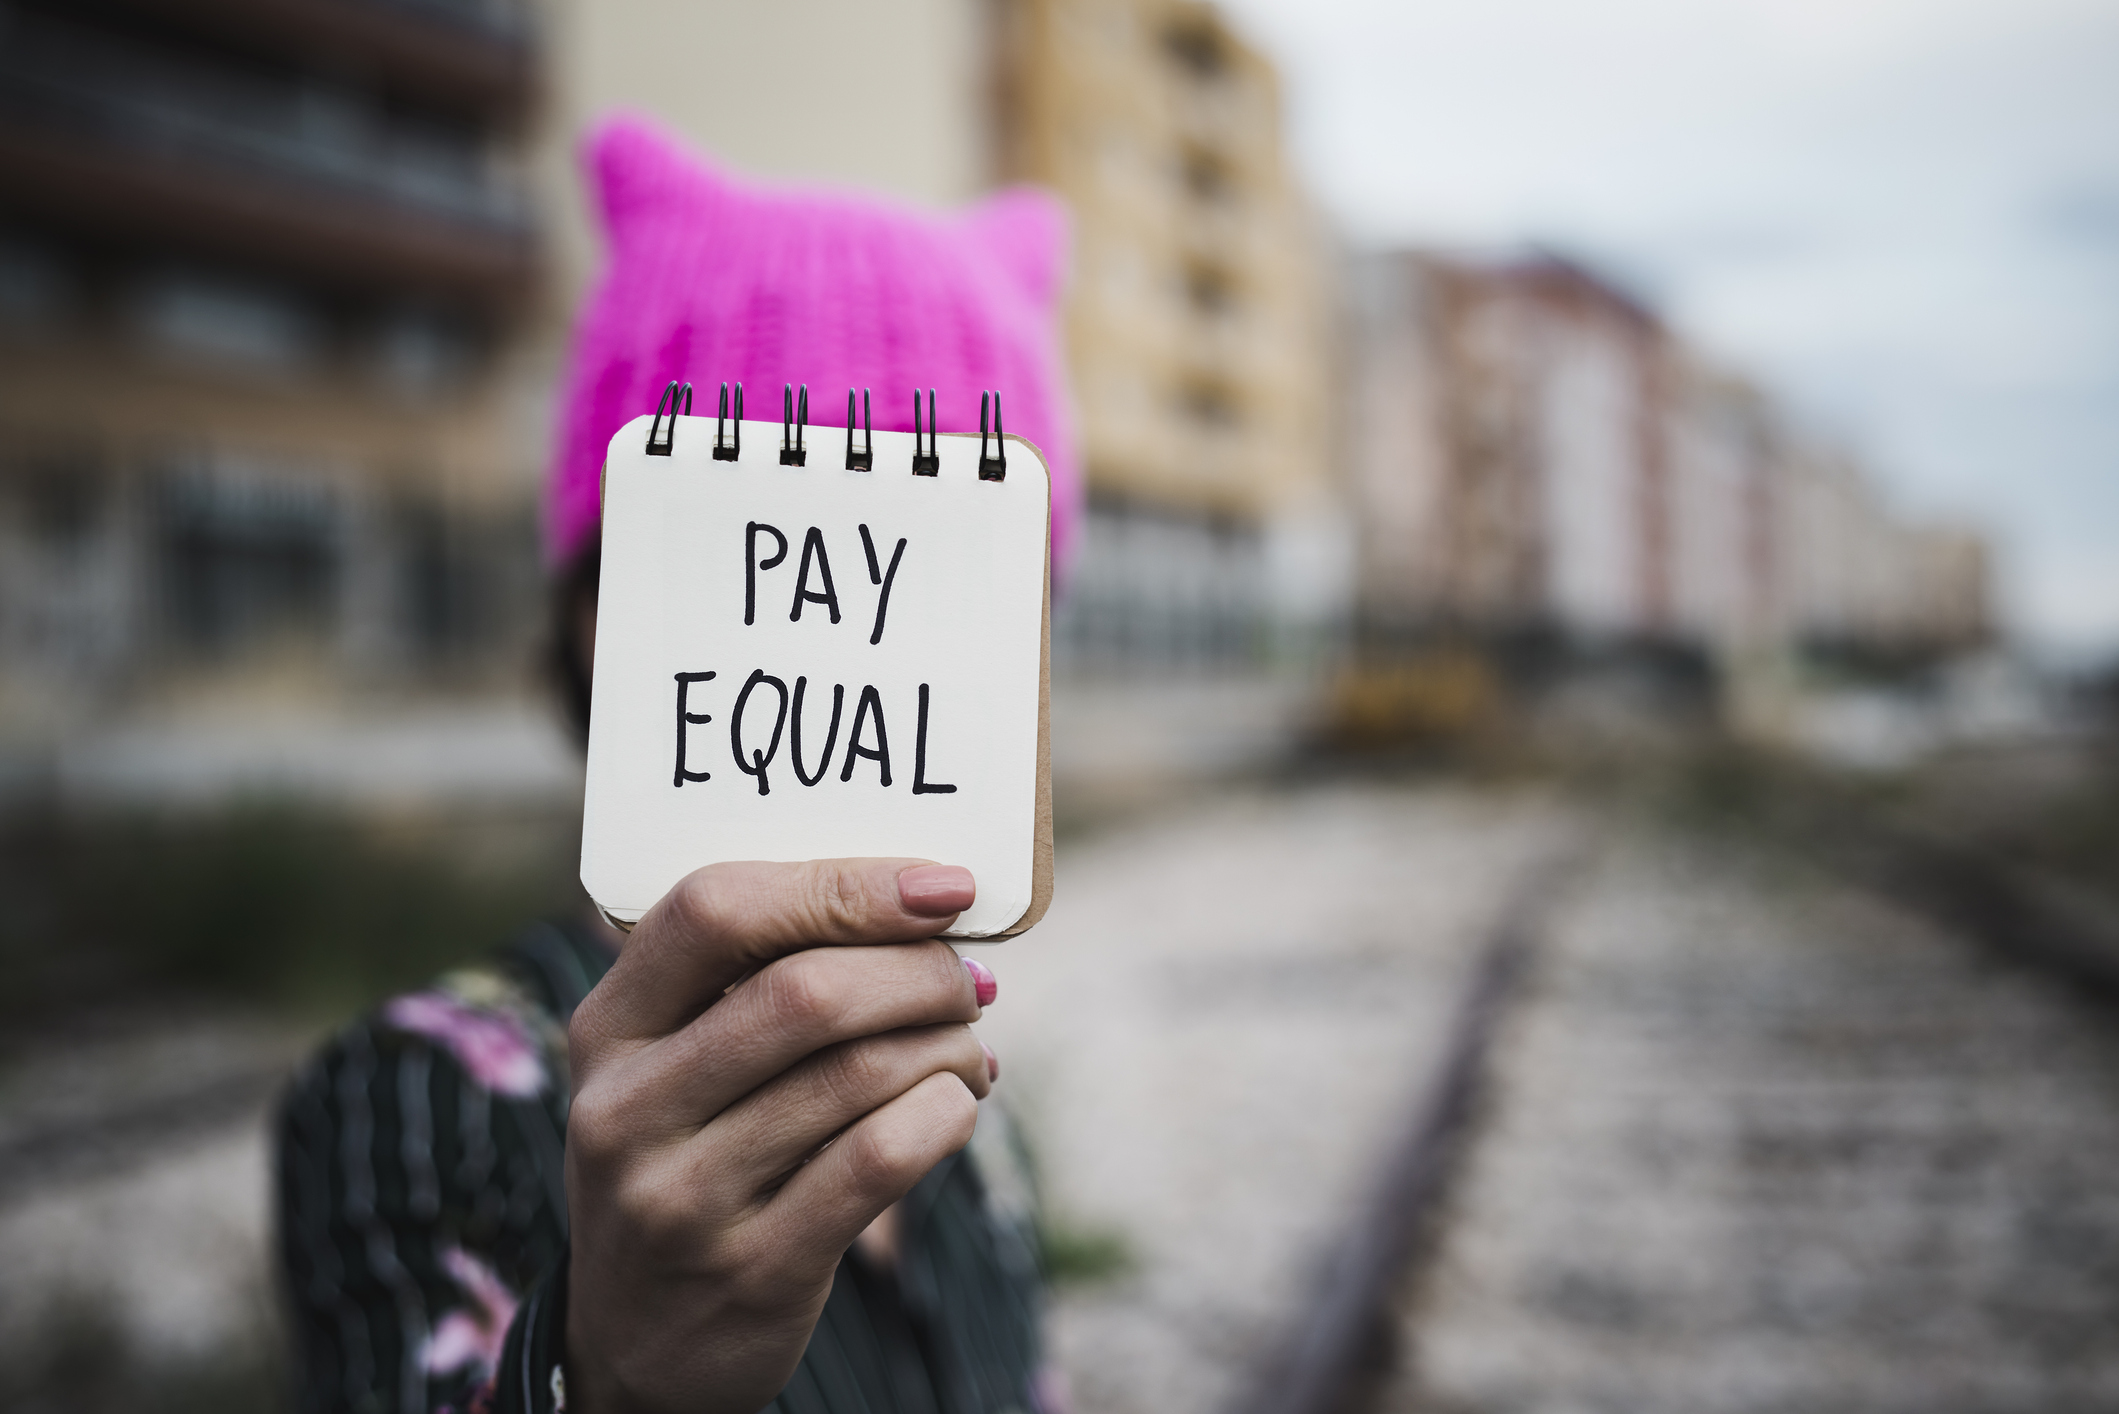 What You Need To Know About Today’s WalkoutOZ Protest For Equal Pay